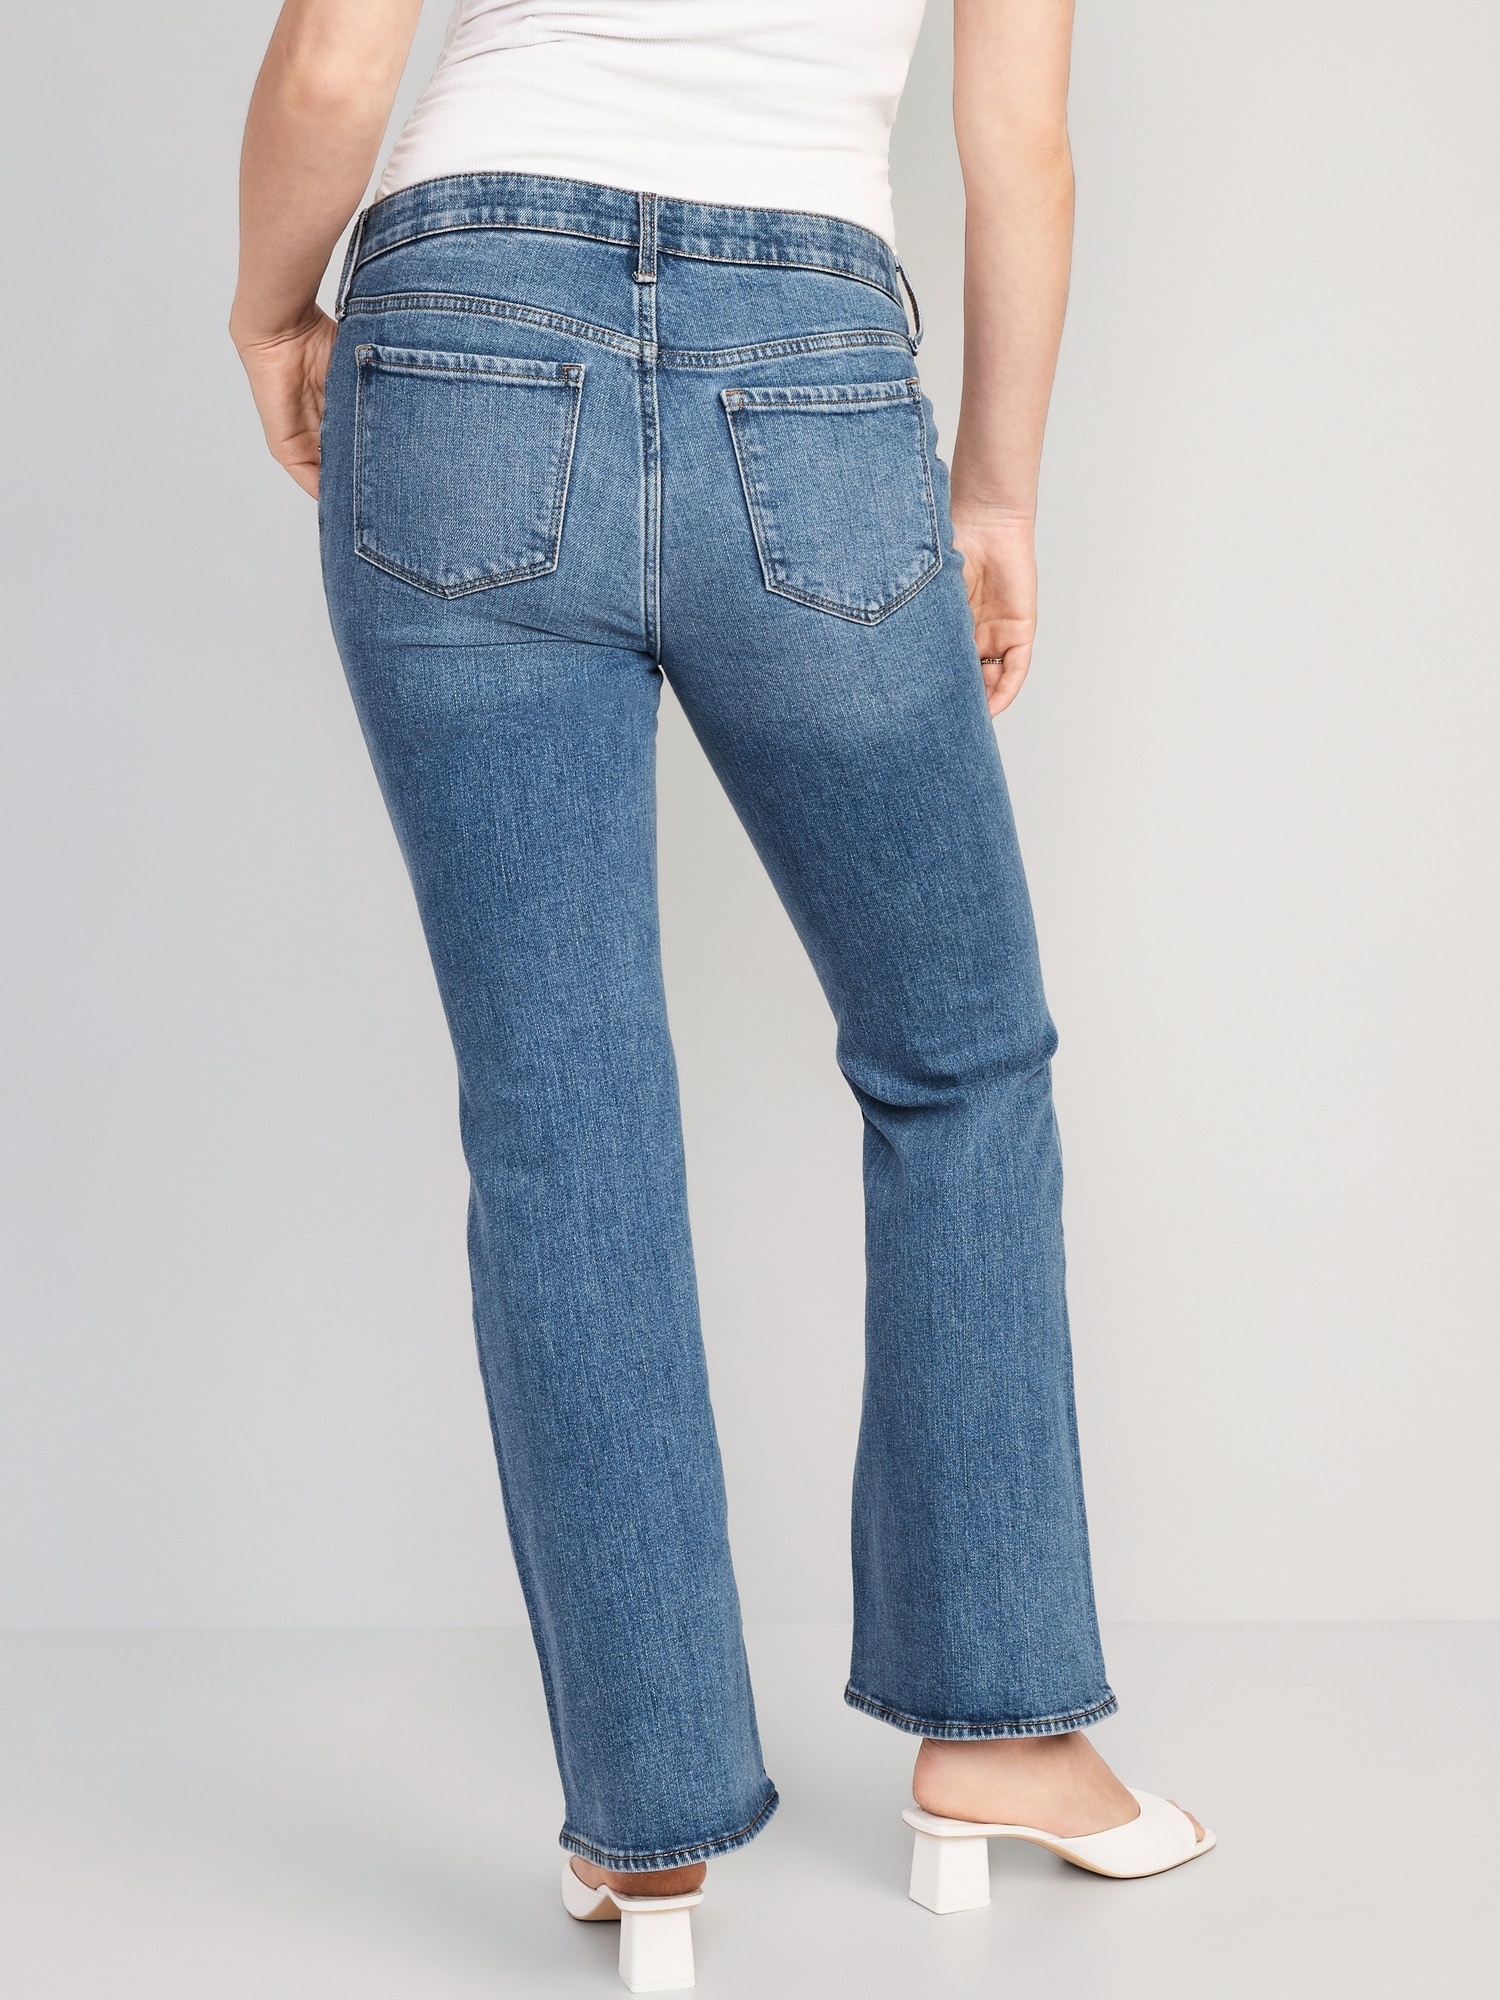 Panel Flare Maternity Front-Low | Old Navy Jeans